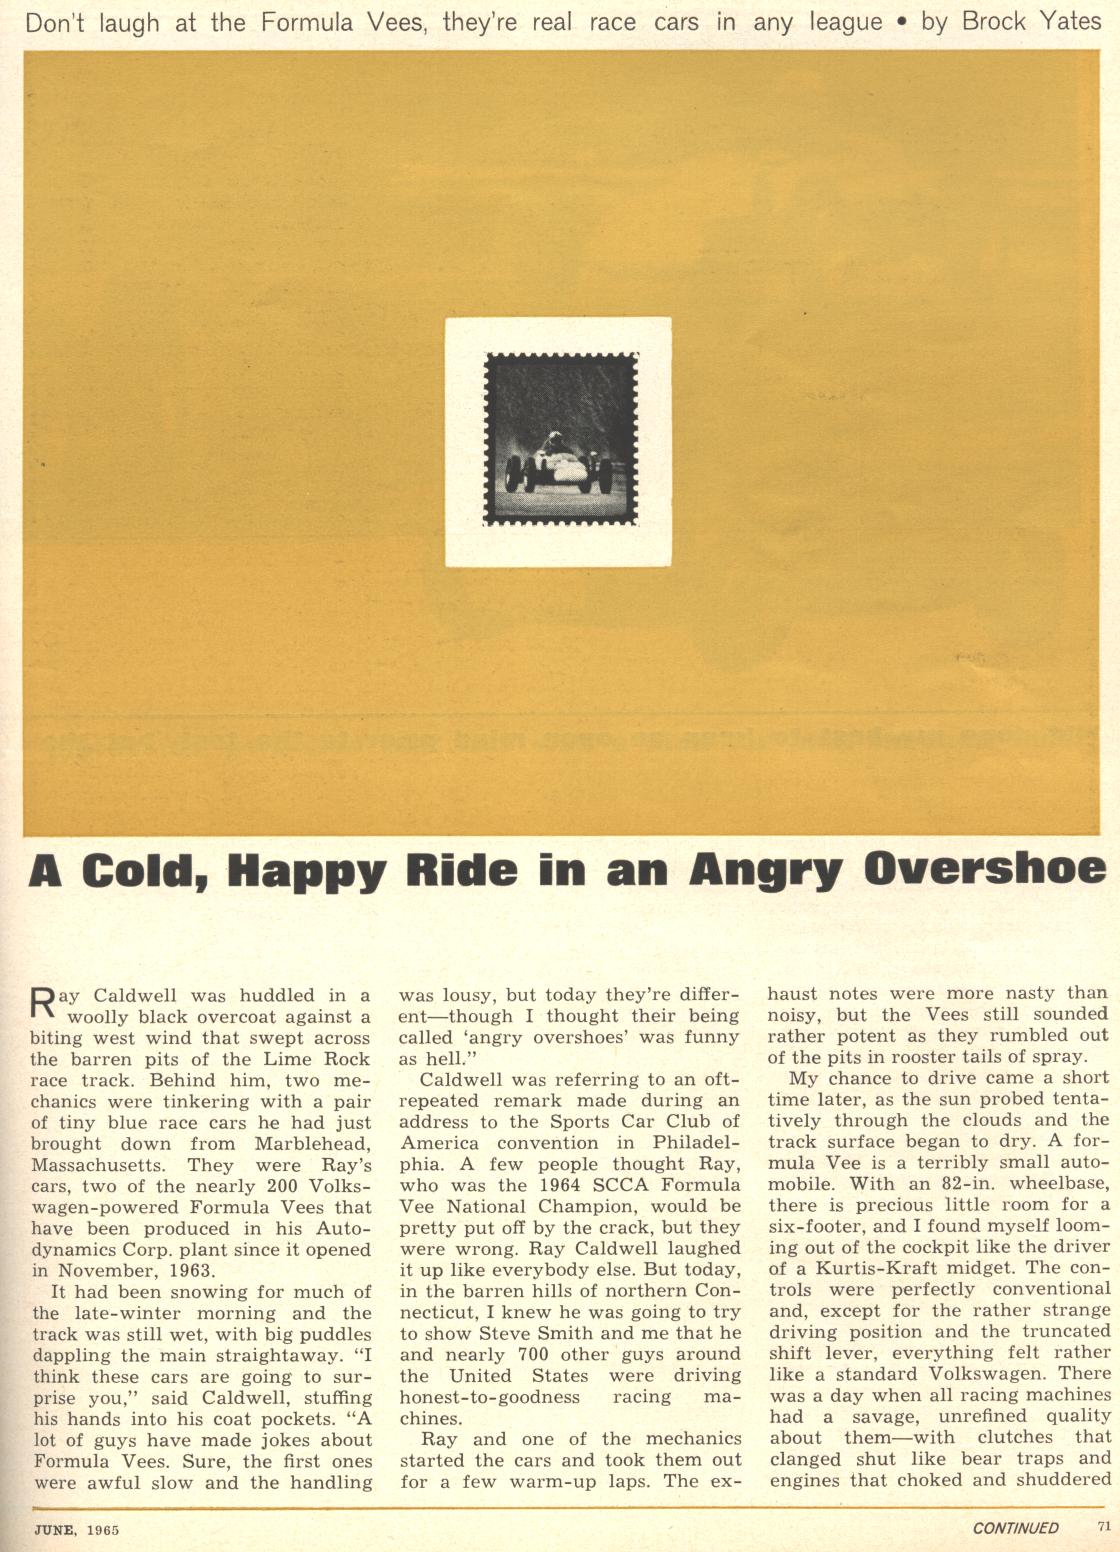 Car and Driver Article, 1965